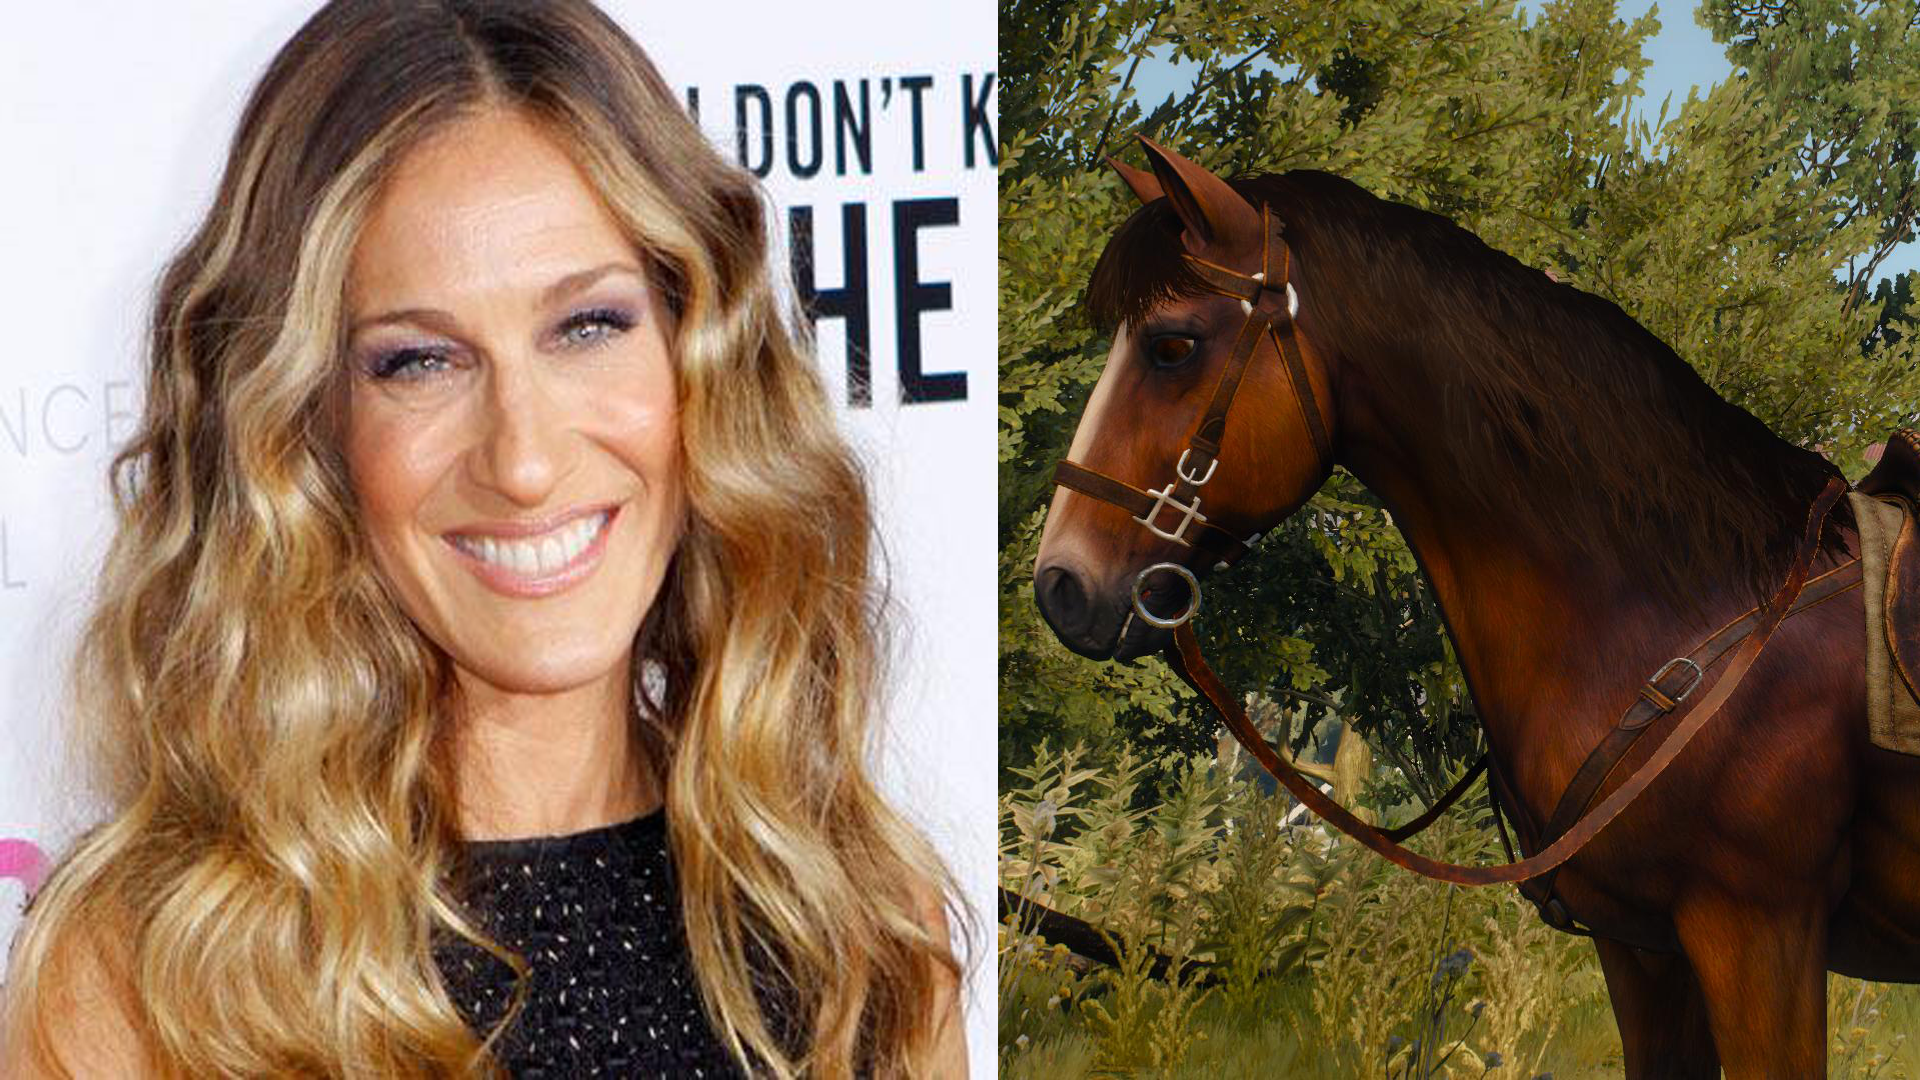 Sarah Jessica Parker as Roach. This is the closest fit.